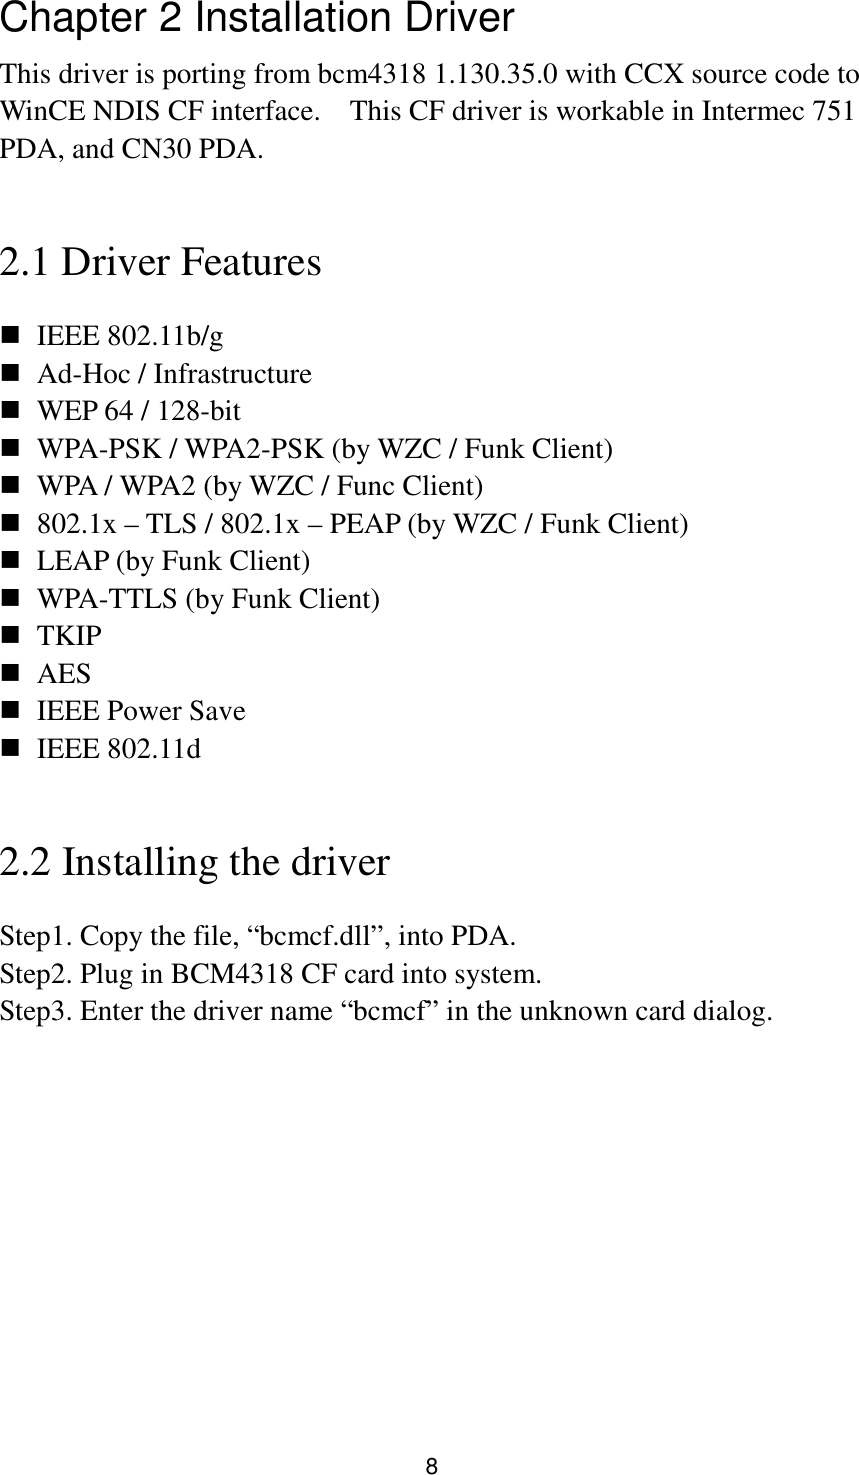 8 Chapter 2 Installation Driver This driver is porting from bcm4318 1.130.35.0 with CCX source code to WinCE NDIS CF interface.    This CF driver is workable in Intermec 751 PDA, and CN30 PDA.    2.1 Driver Features  IEEE 802.11b/g  Ad-Hoc / Infrastructure  WEP 64 / 128-bit  WPA-PSK / WPA2-PSK (by WZC / Funk Client)  WPA / WPA2 (by WZC / Func Client)  802.1x – TLS / 802.1x – PEAP (by WZC / Funk Client)  LEAP (by Funk Client)  WPA-TTLS (by Funk Client)  TKIP  AES  IEEE Power Save  IEEE 802.11d  2.2 Installing the driver Step1. Copy the file, “bcmcf.dll”, into PDA. Step2. Plug in BCM4318 CF card into system. Step3. Enter the driver name “bcmcf” in the unknown card dialog.  